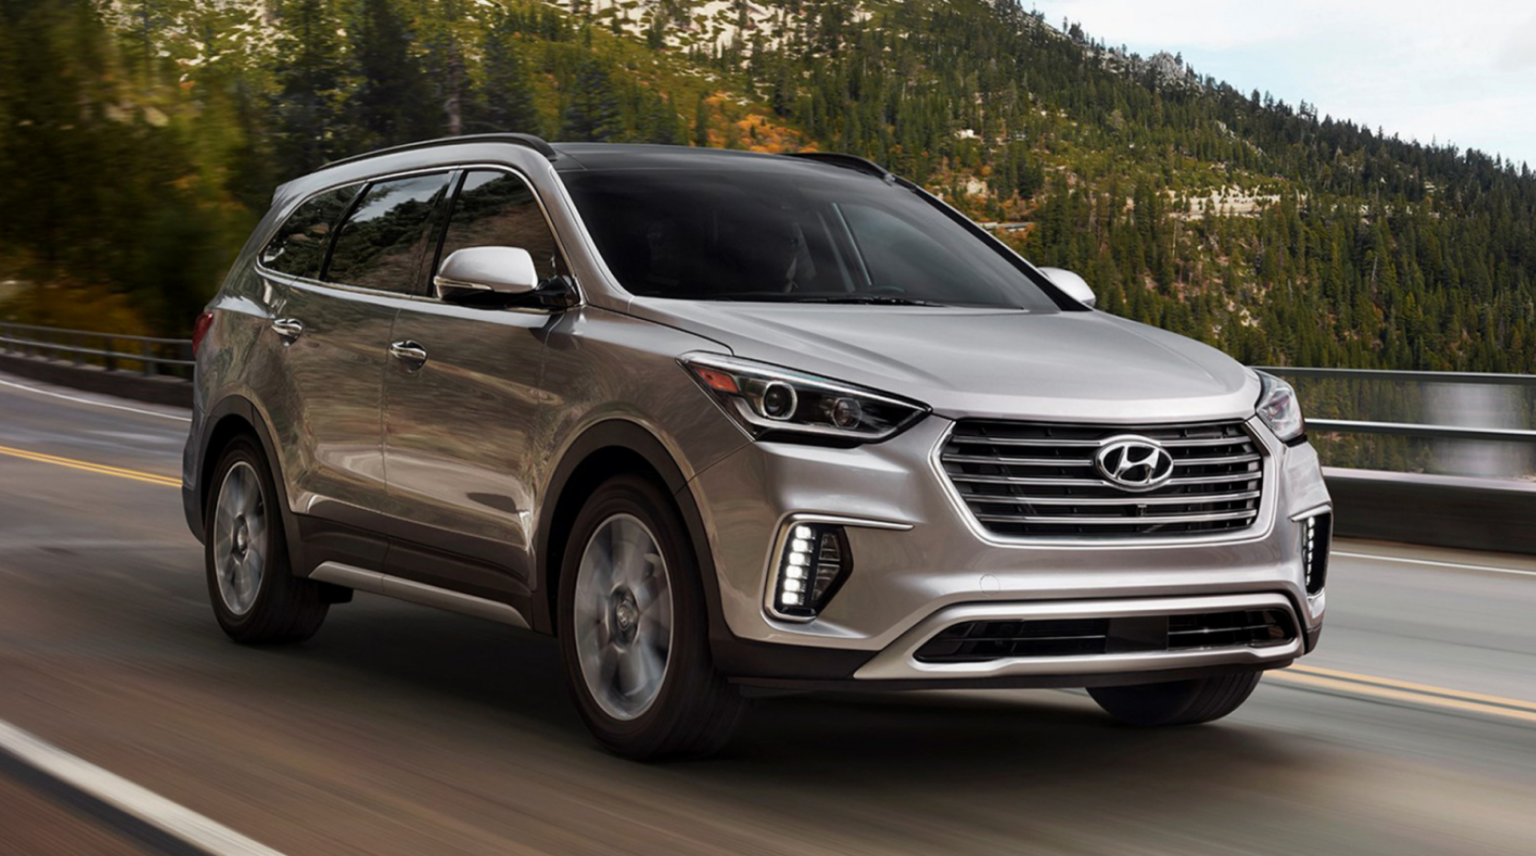 New 2024 Hyundai Santafe Models What to Expect and When to Expect Them